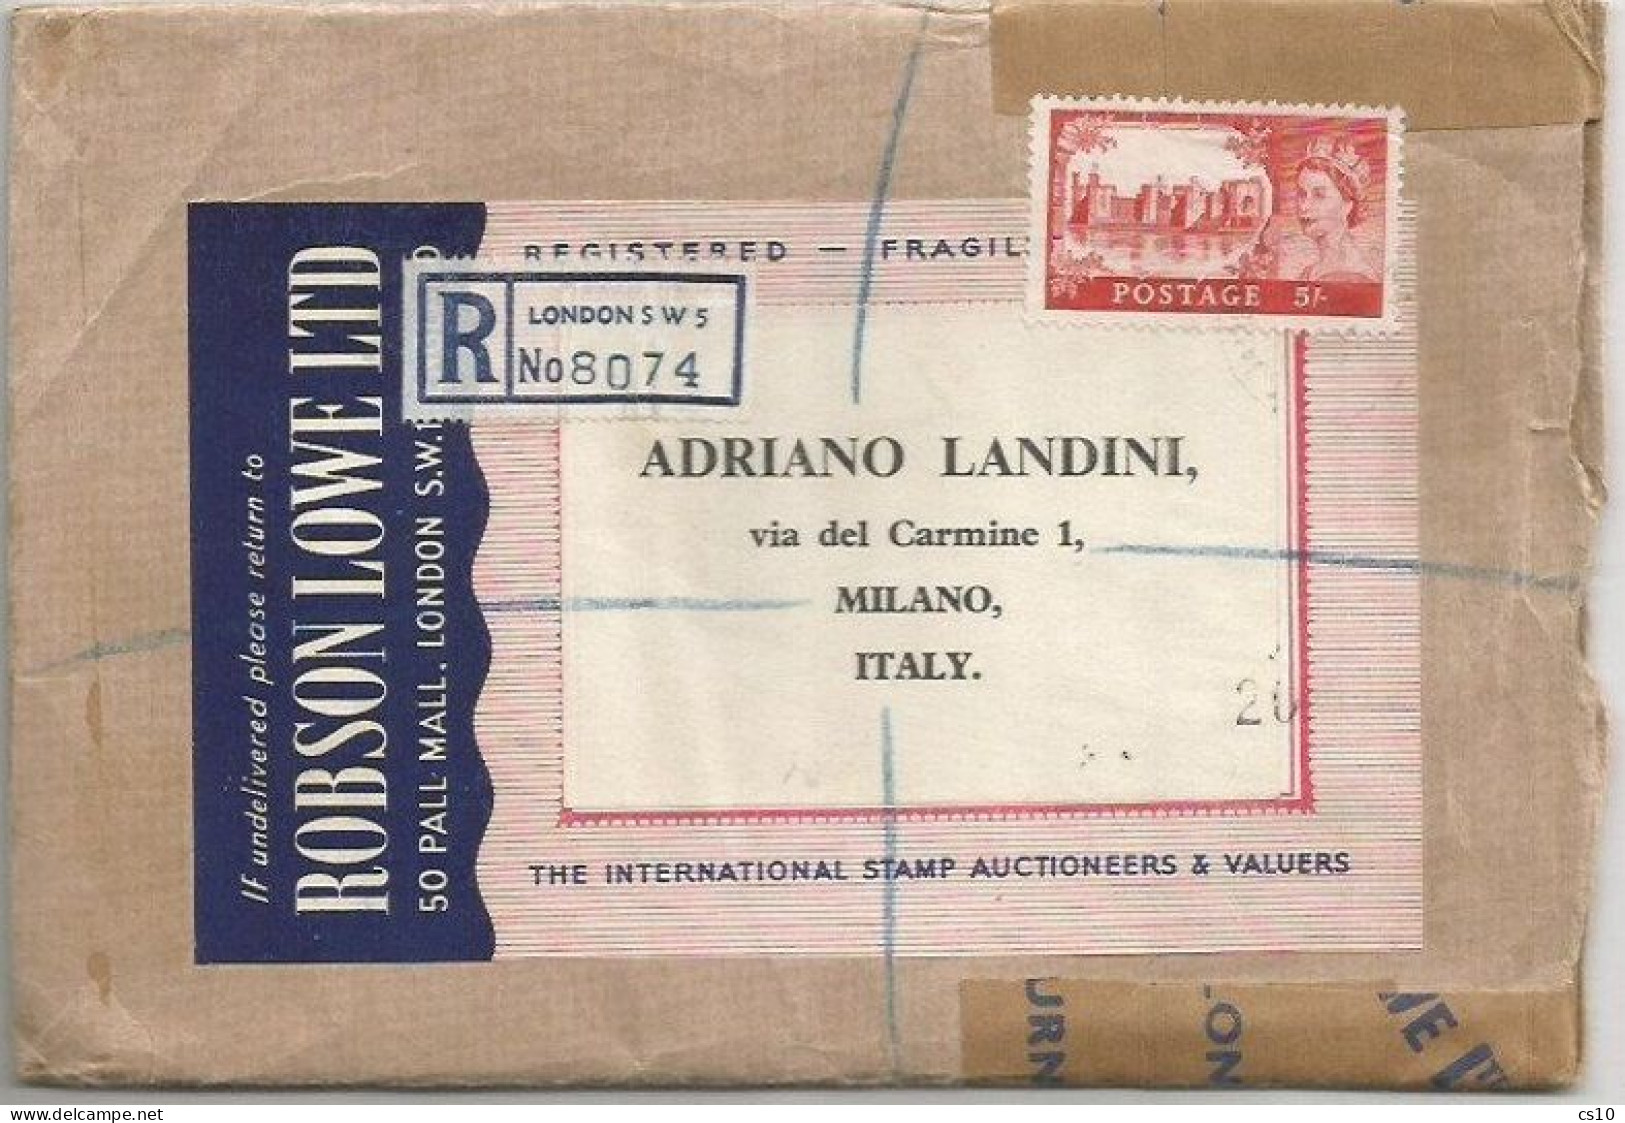 UK Britain Castles QE2 S5 Solo Franking Reg.CV London 3march 1967 To Italy - Poststempel